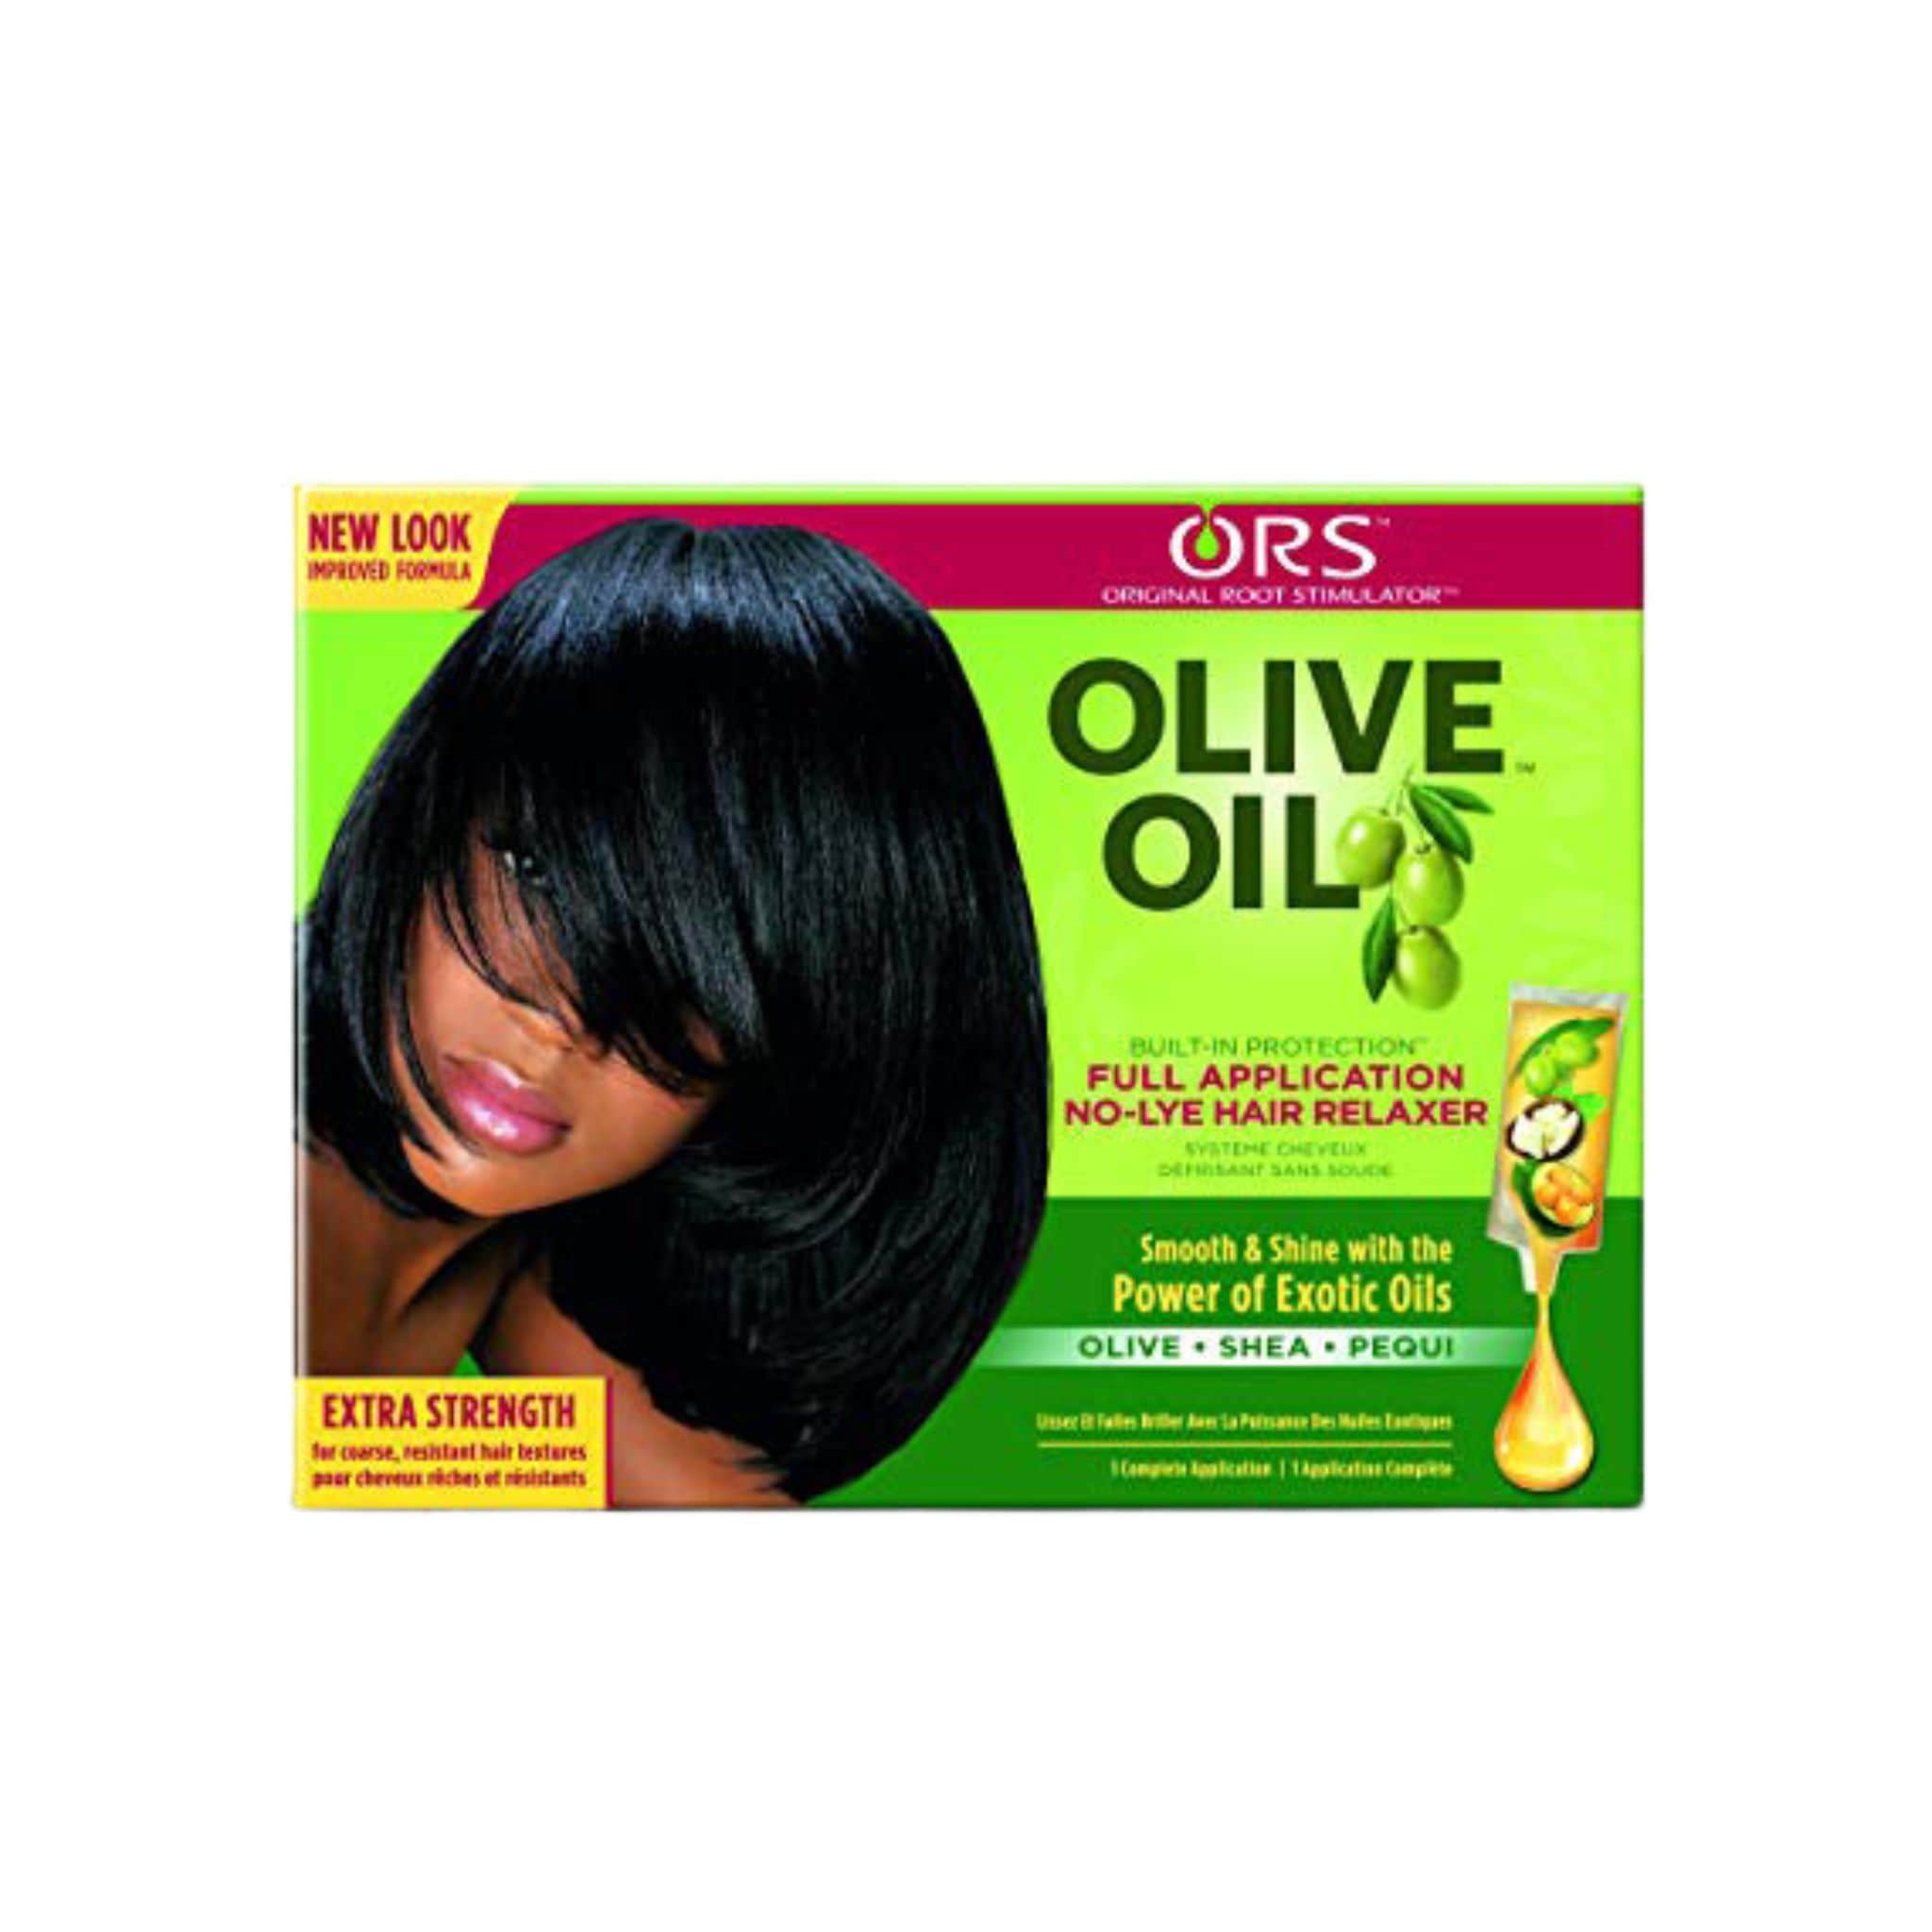 ALISADOR NO-LYE RELAXER EXTRA STRENGTH OLIVE OIL ORS